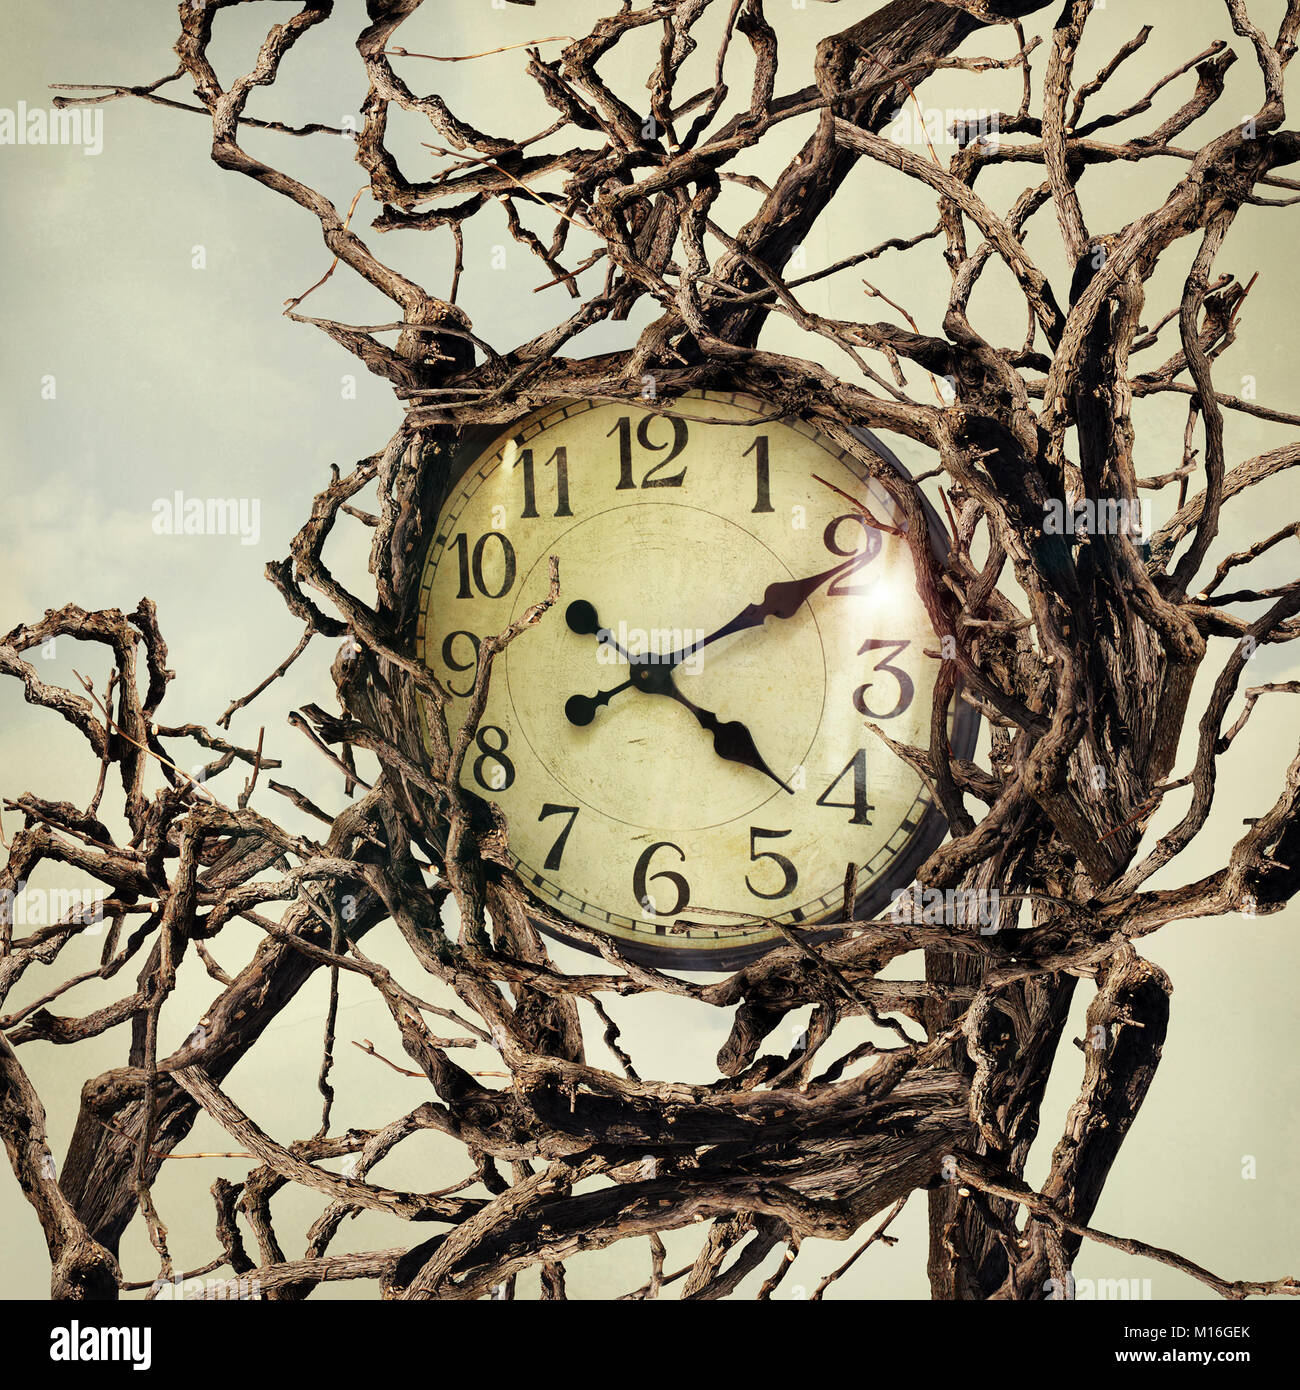 Beautiful surreal image representing a clock entwined by many branches Stock Photo